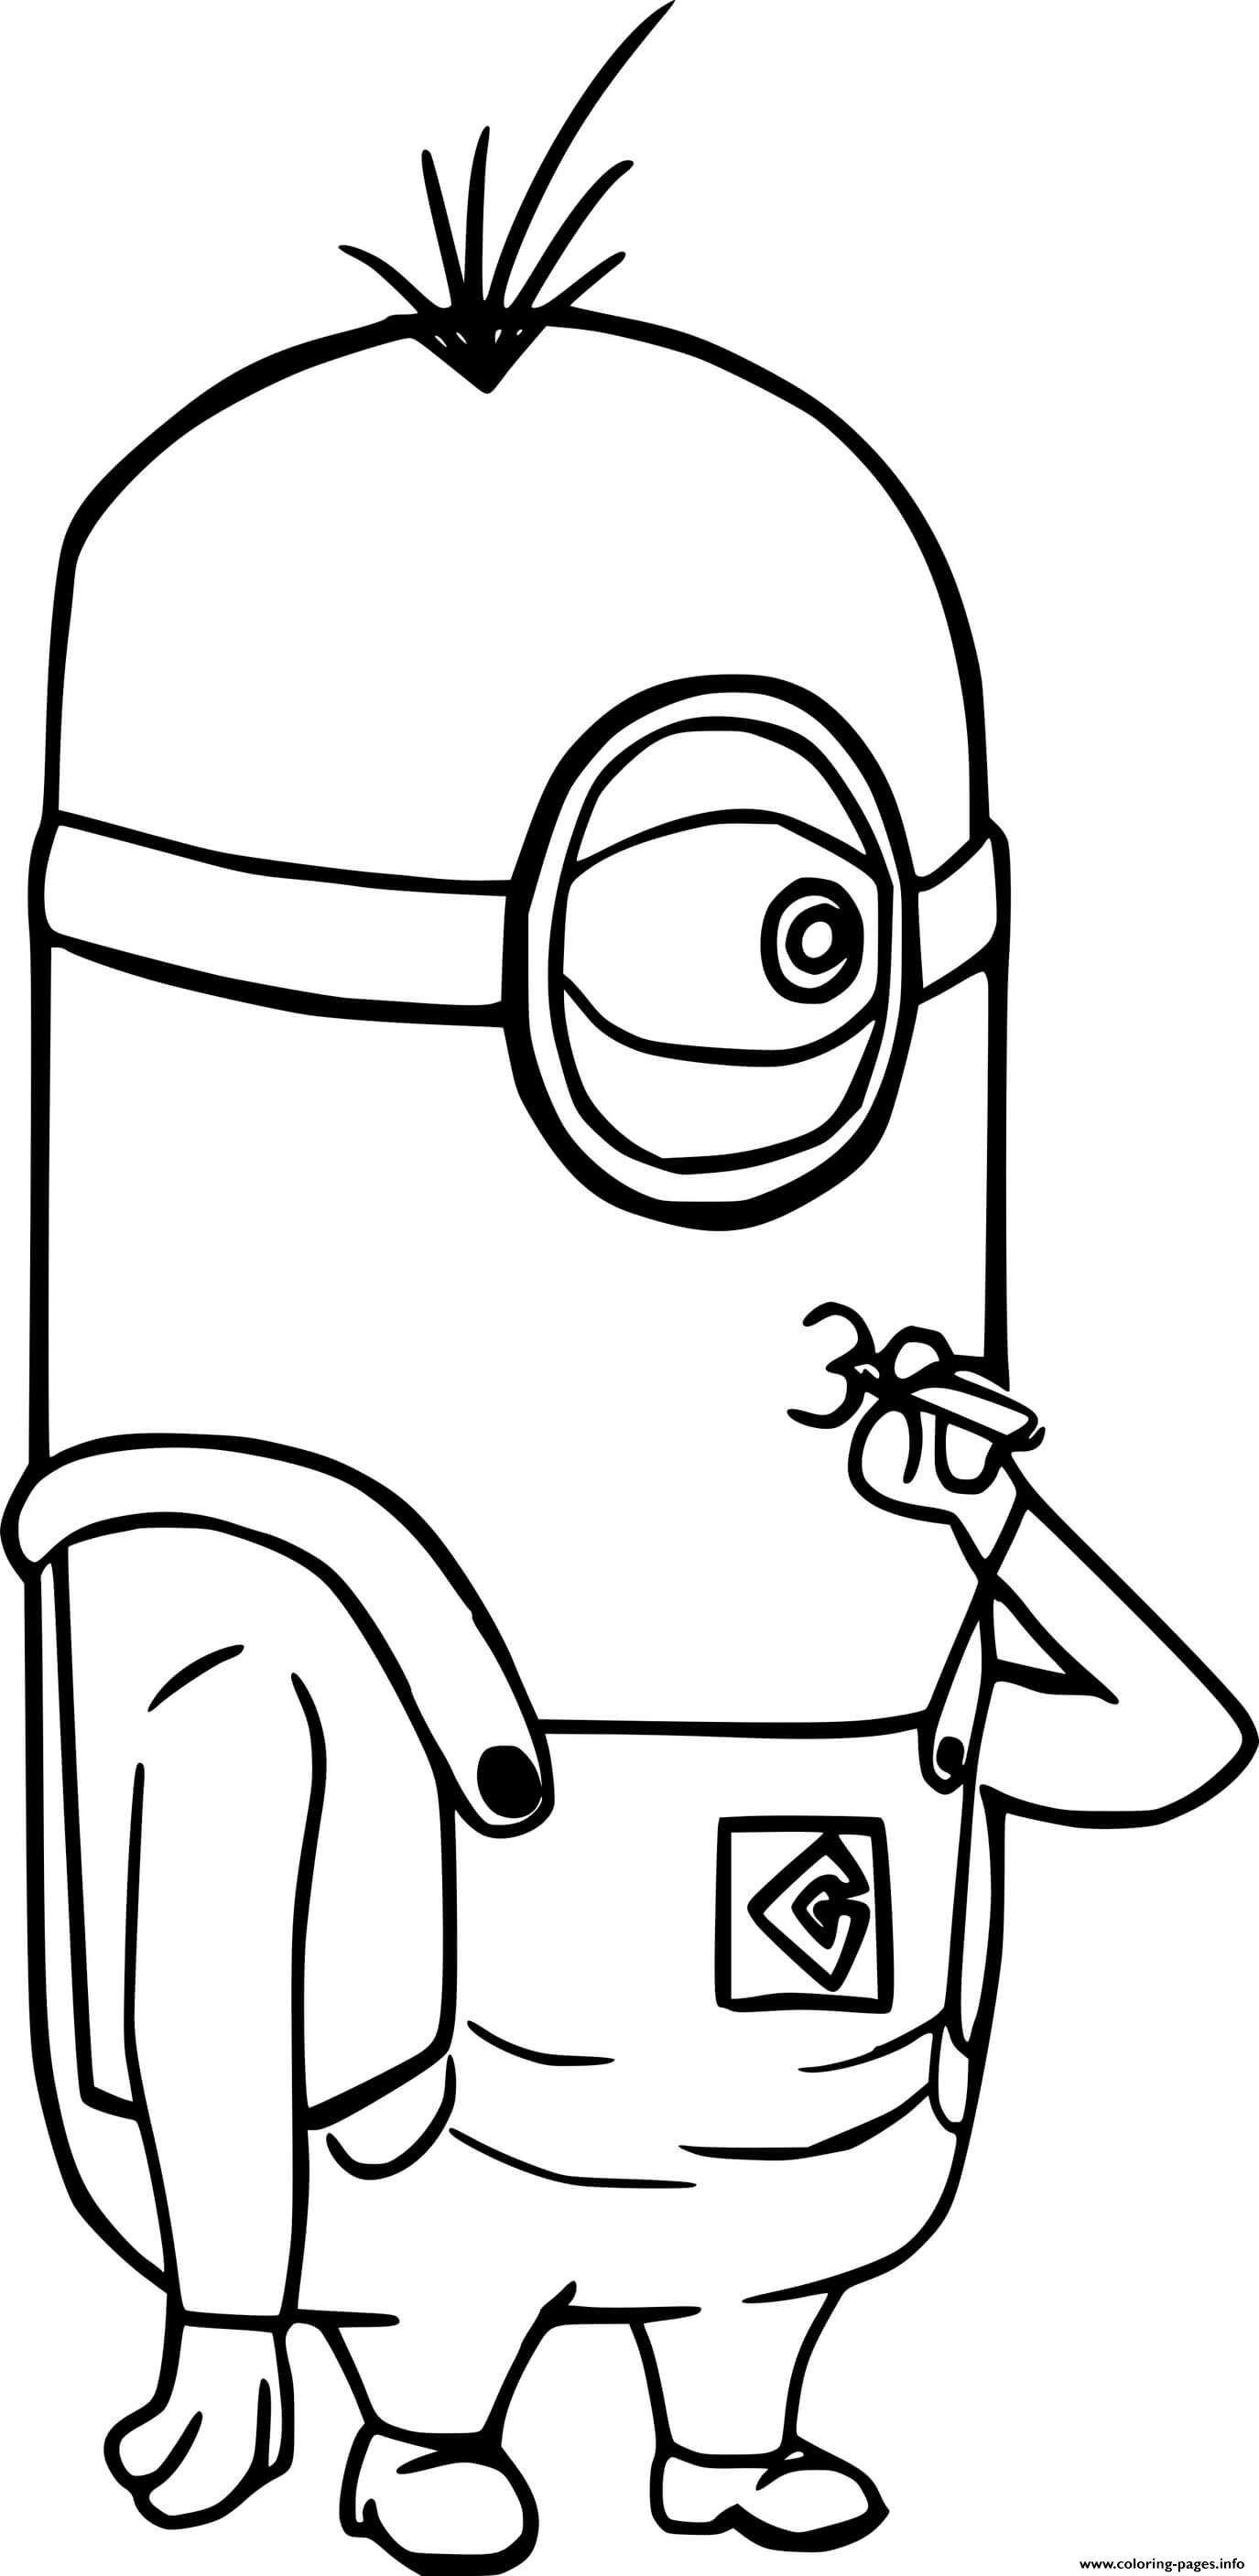 Minion Whistling coloring